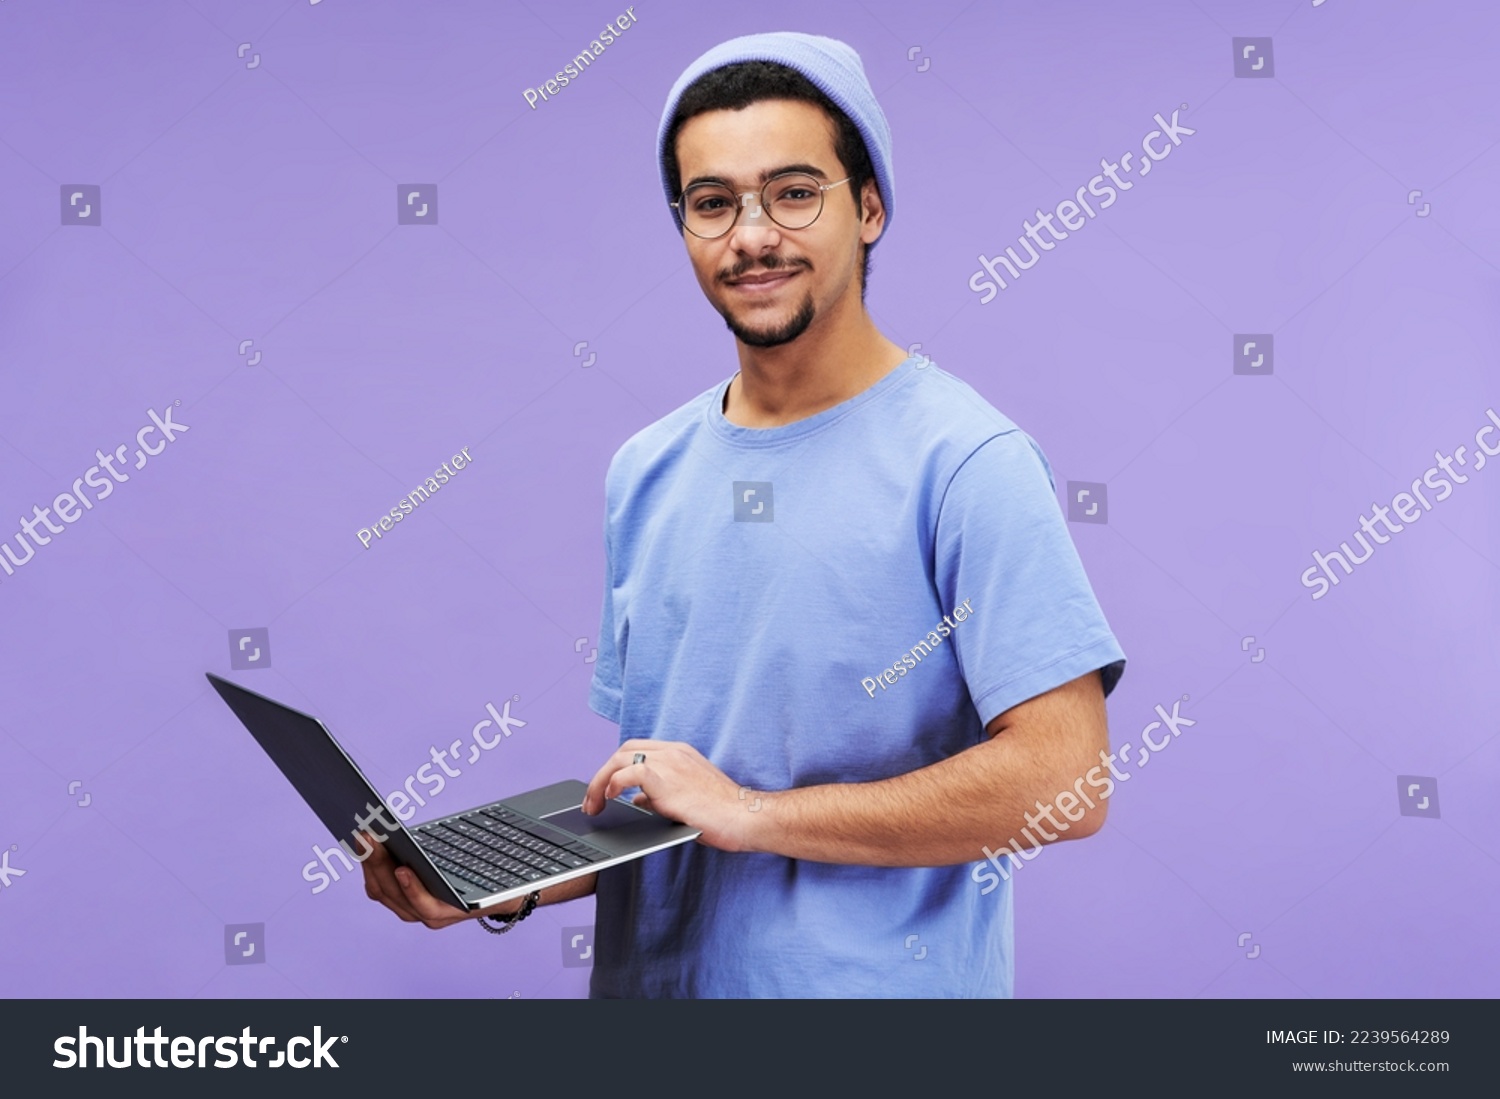 Young successful student or designer in blue t-shirt and beanie hat holding laptop while looking at camera against lavender background #2239564289